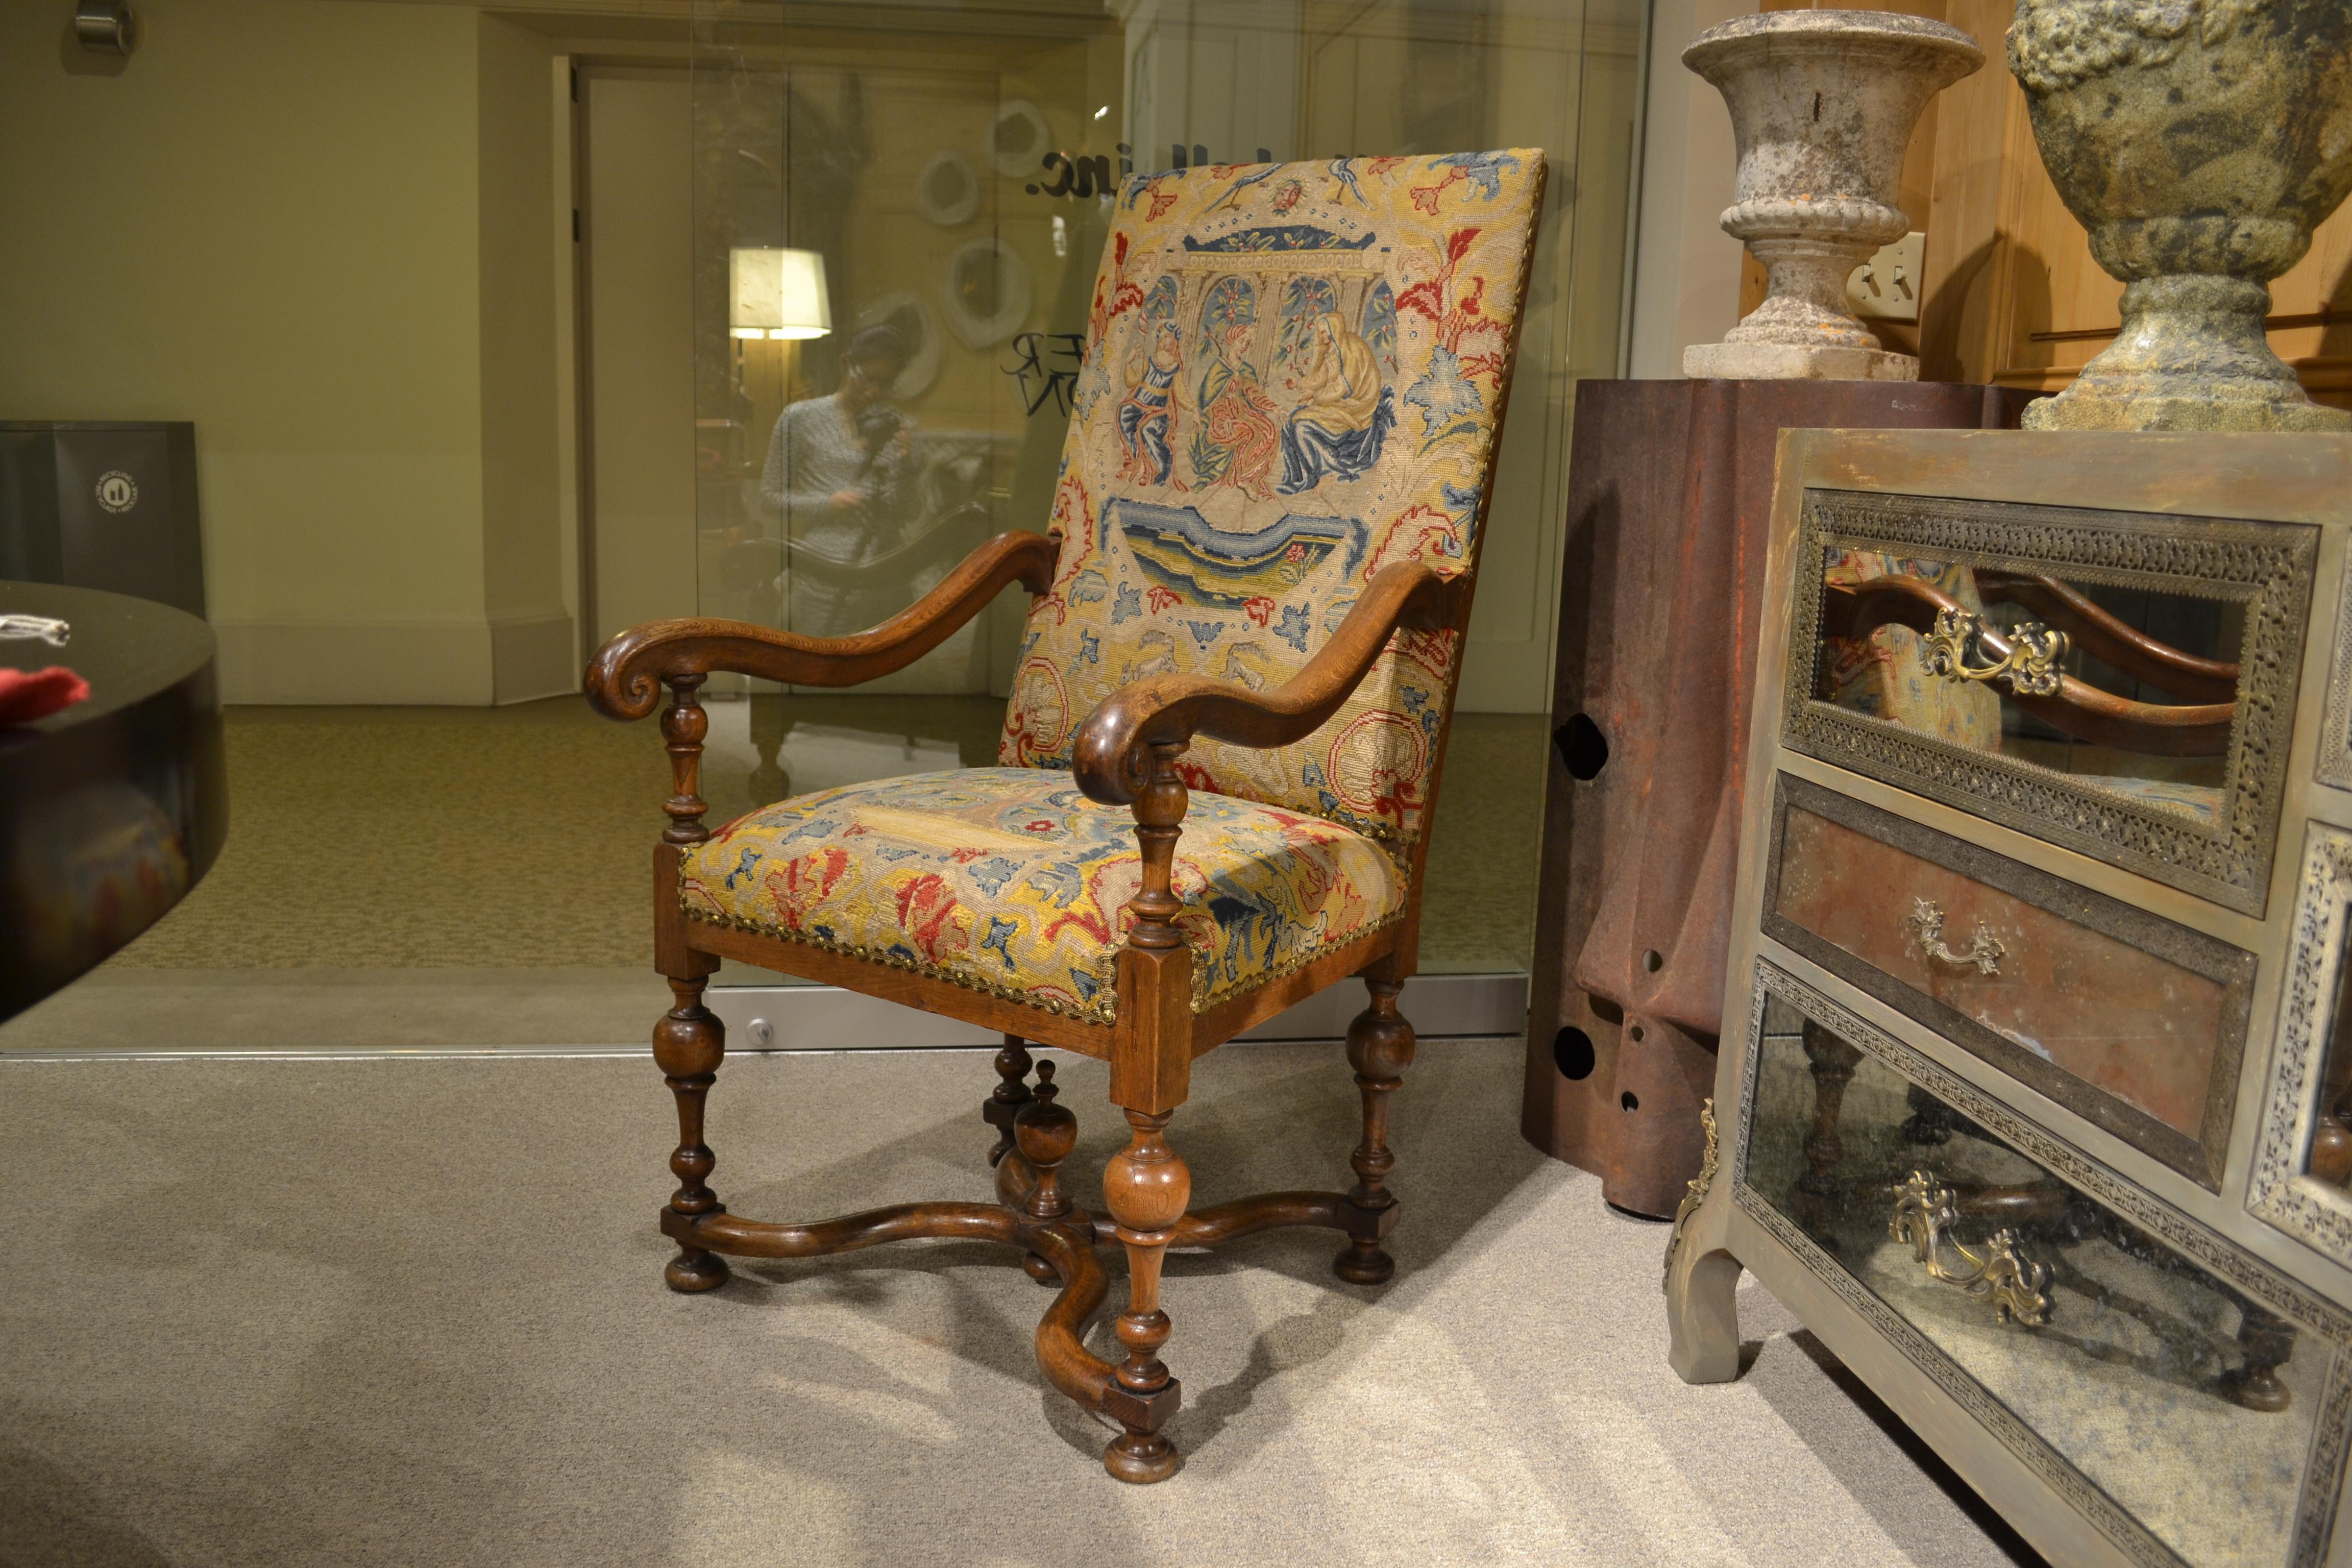 This decorative late 18th century Continental piece has a fine base with turned legs, shaped stretchers and finial. The shaped arms are comfortable and nicely proportioned. We have restored the chair, and removed, cleaned and reapplied the early